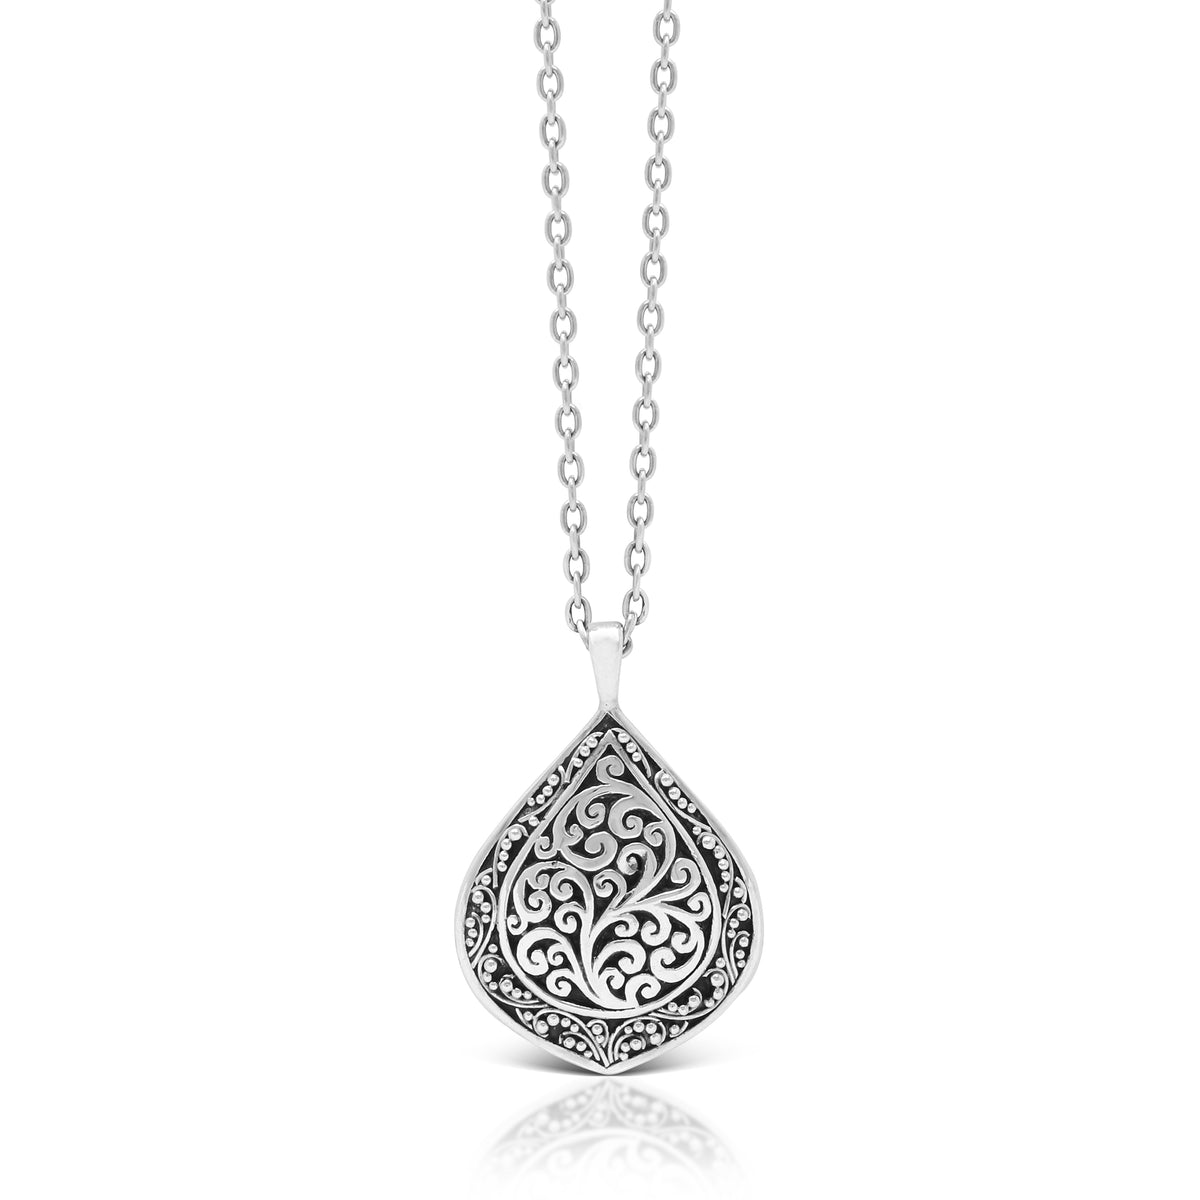 Classic Signature Scroll with Granulated Border Pendant Necklace. Pendant 21mm x 31mm on 18" chain